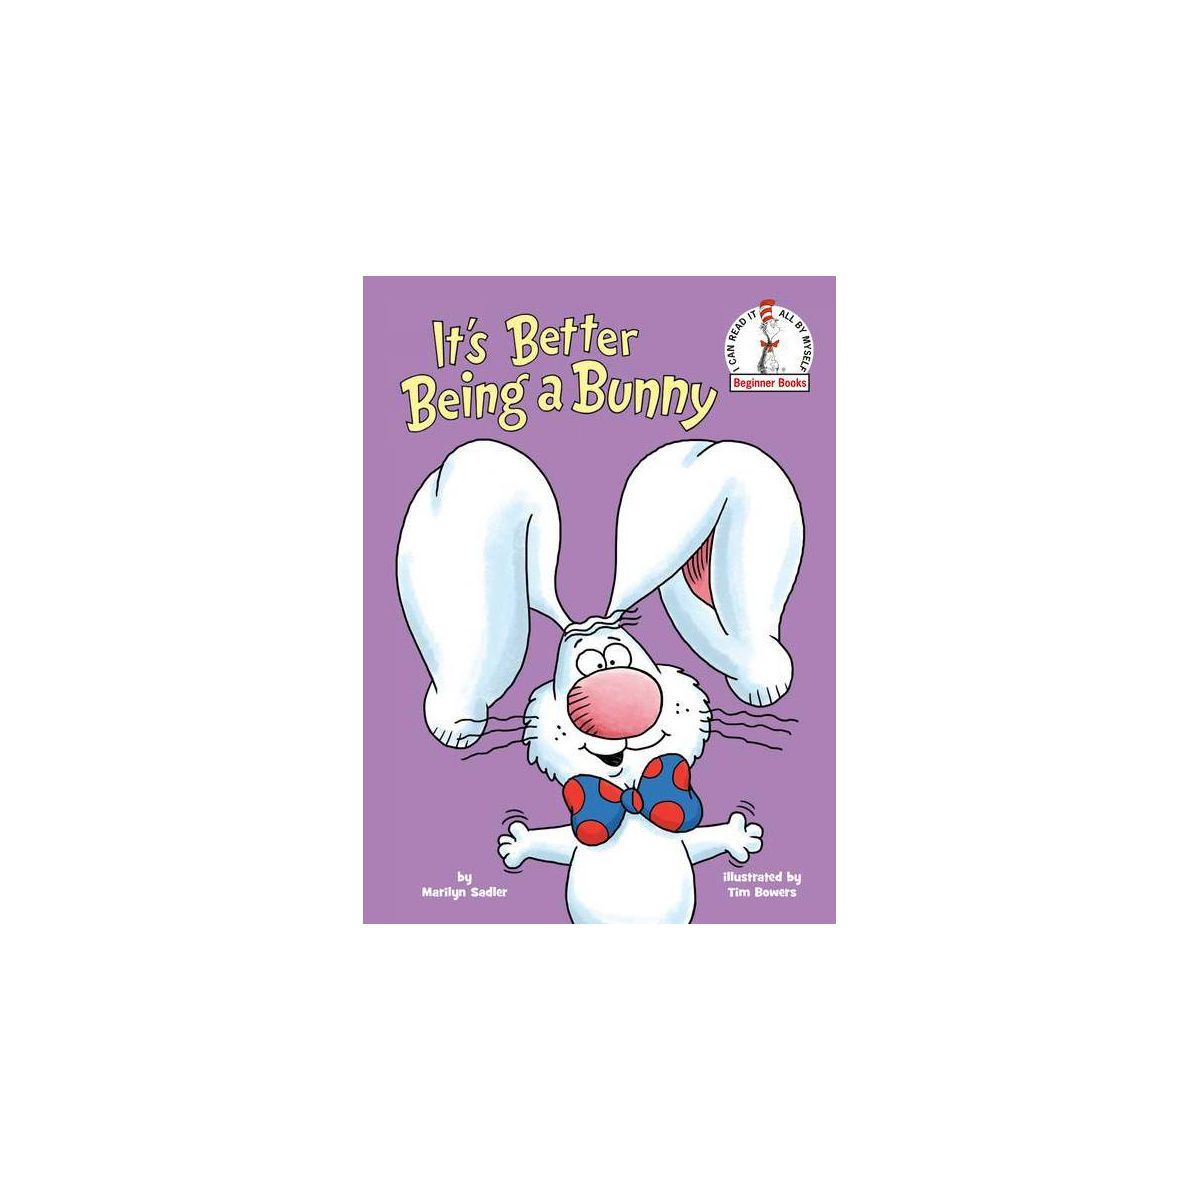 It's Better Being a Bunny - (Beginner Books(r)) by Marilyn Sadler (Hardcover) | Target